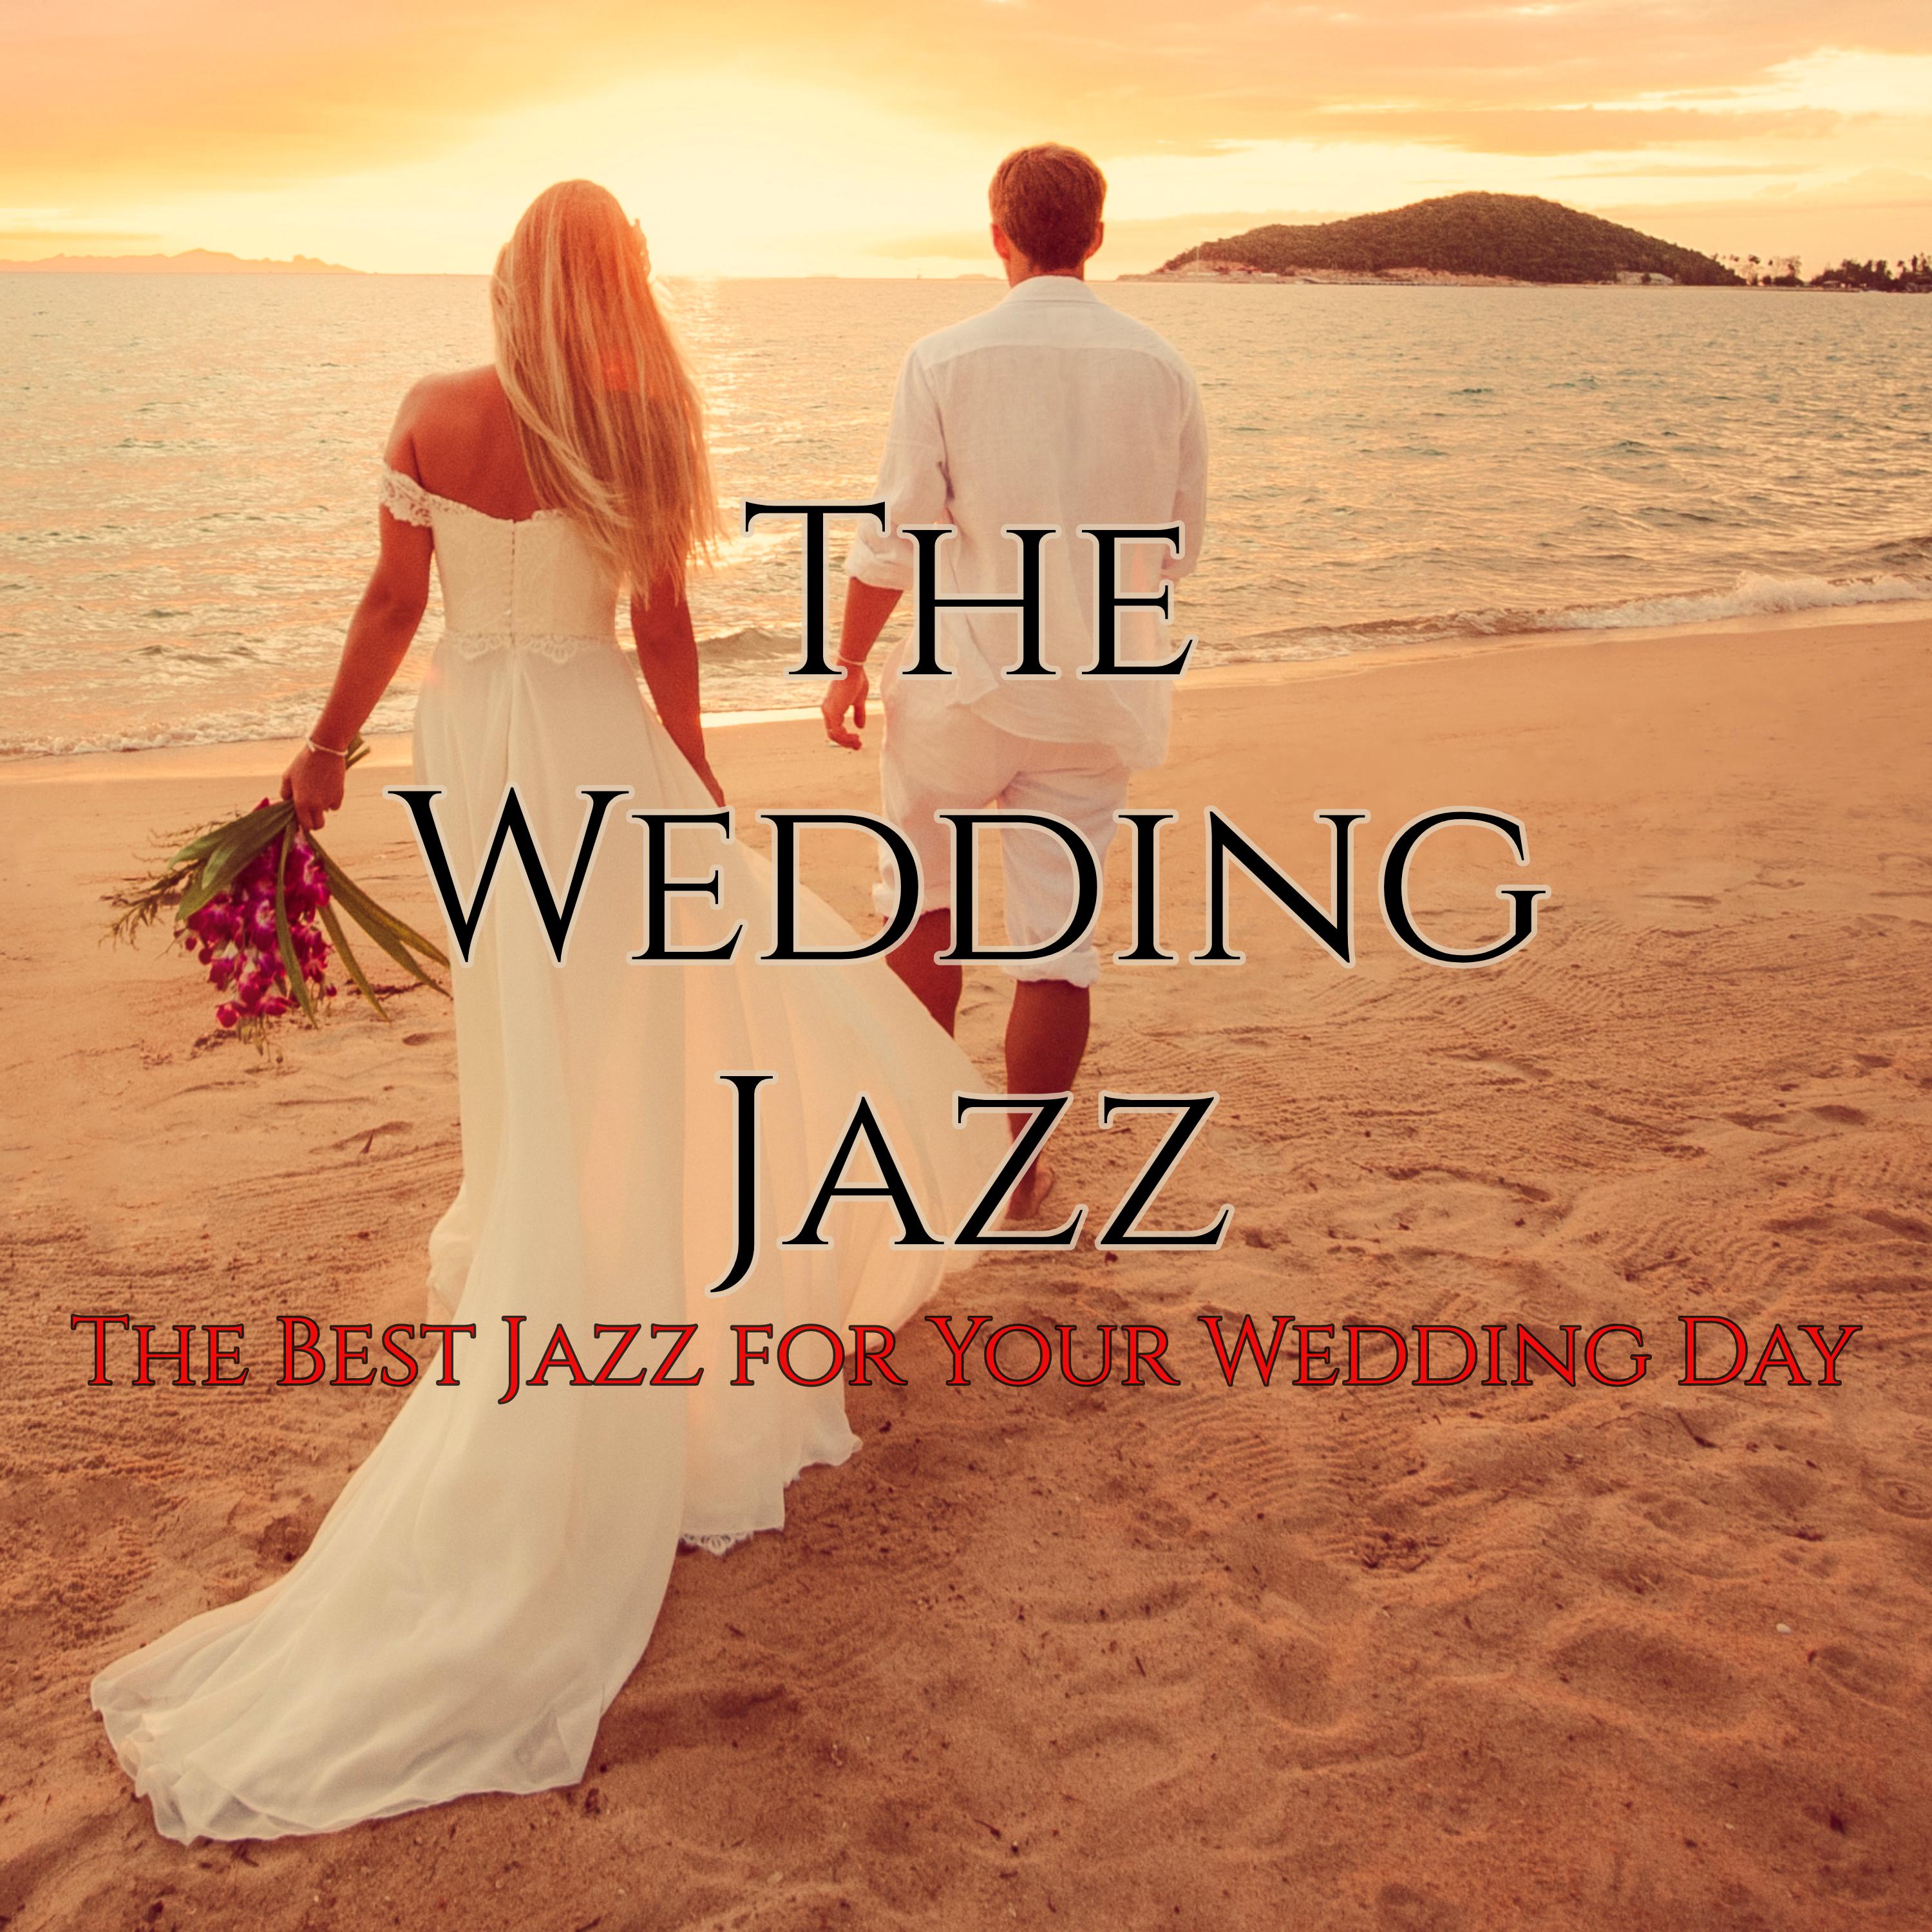 The Wedding Jazz  The Best Jazz for Your Wedding Day